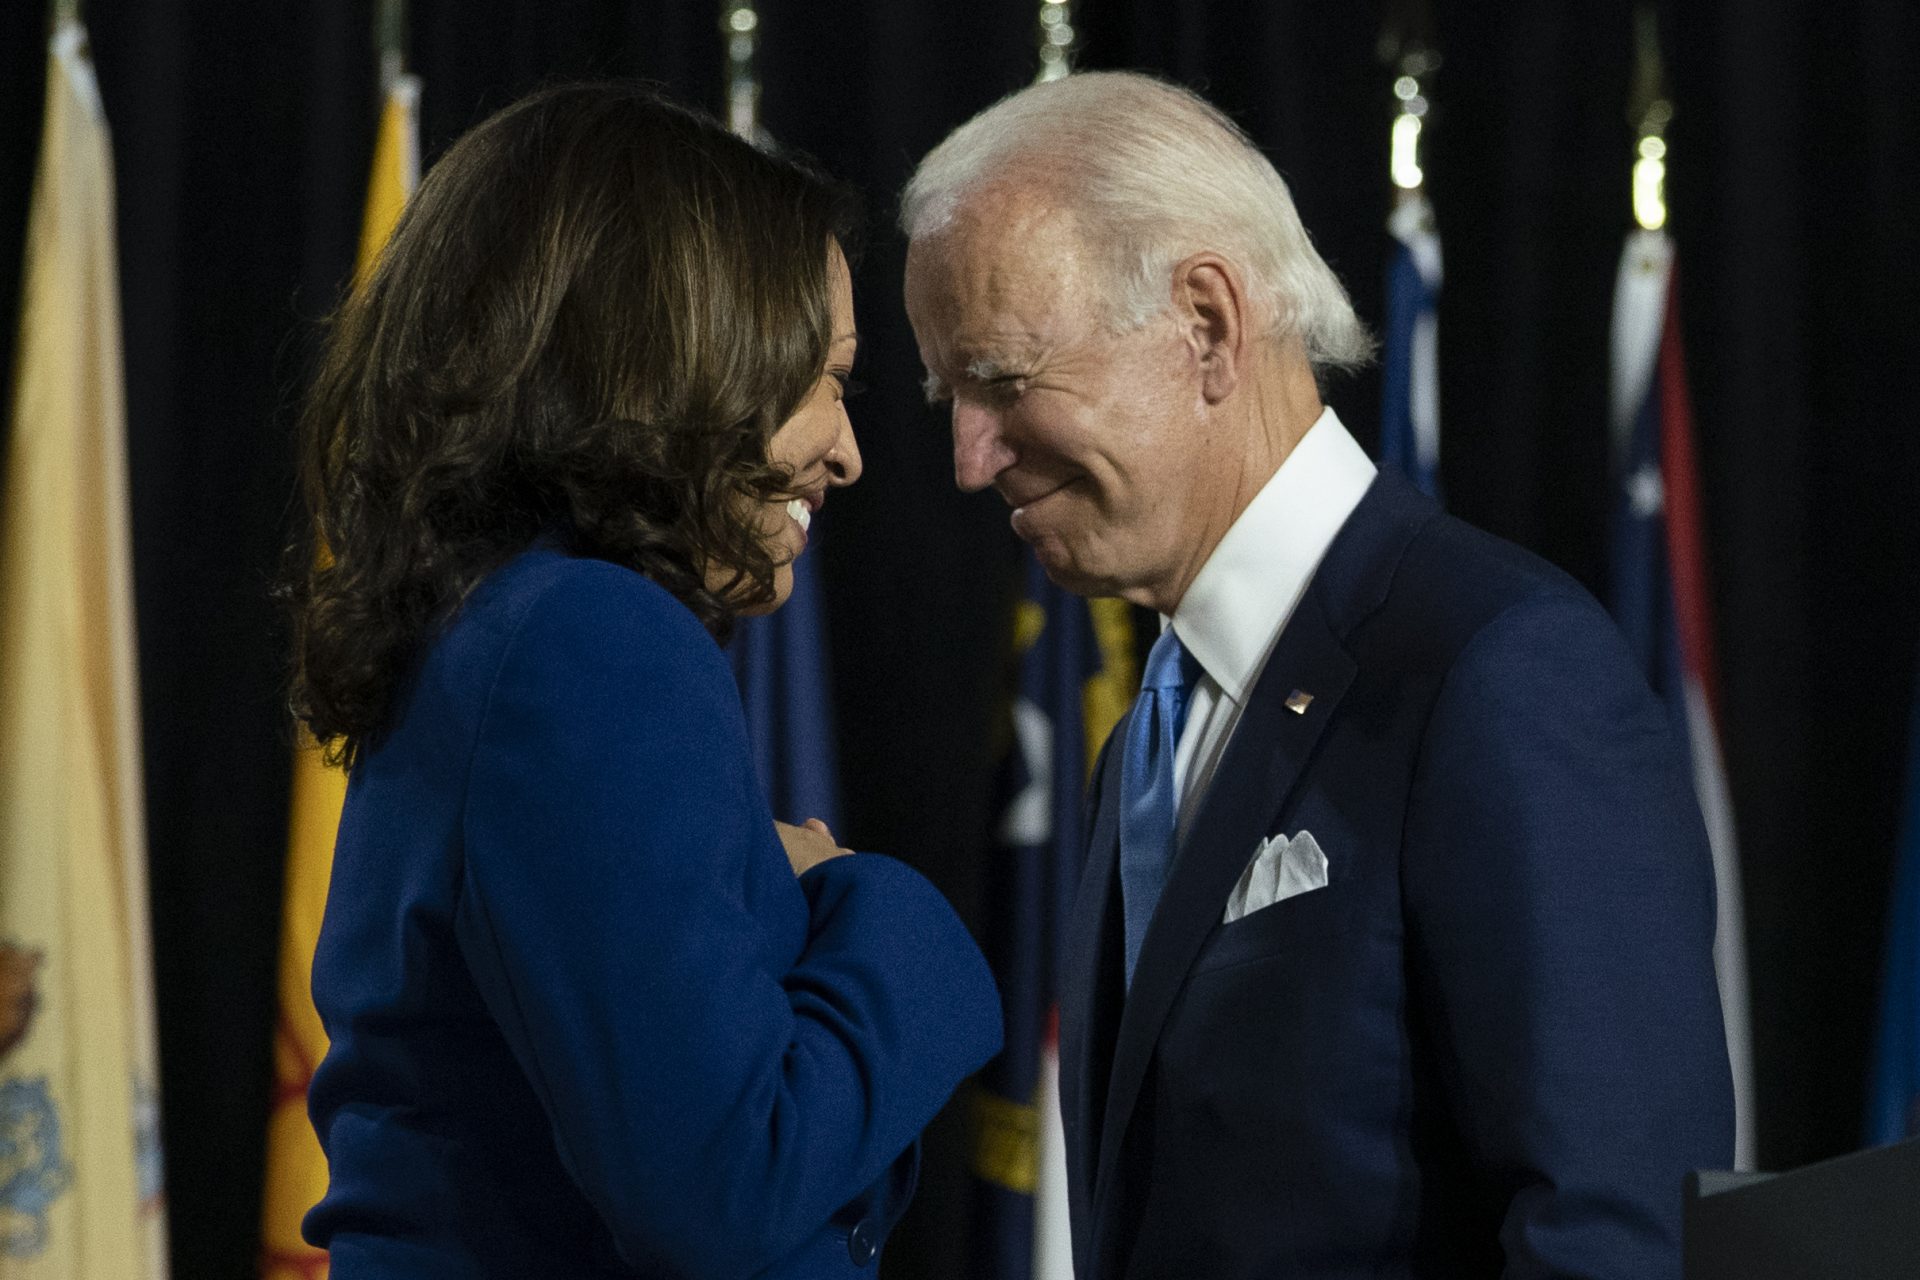 In this Aug. 12, 2020, file photo, Democratic presidential candidate former Vice President Joe Biden and his running mate Sen. Kamala Harris, D-Calif., pass each other as Harris moves to the podium to speak during a campaign event at Alexis Dupont High School in Wilmington, Del. Harris made history Saturday, Nov. 7, as the first Black woman elected as vice president of the United States, shattering barriers that have kept men — almost all of them white — entrenched at the highest levels of American politics for more than two centuries.